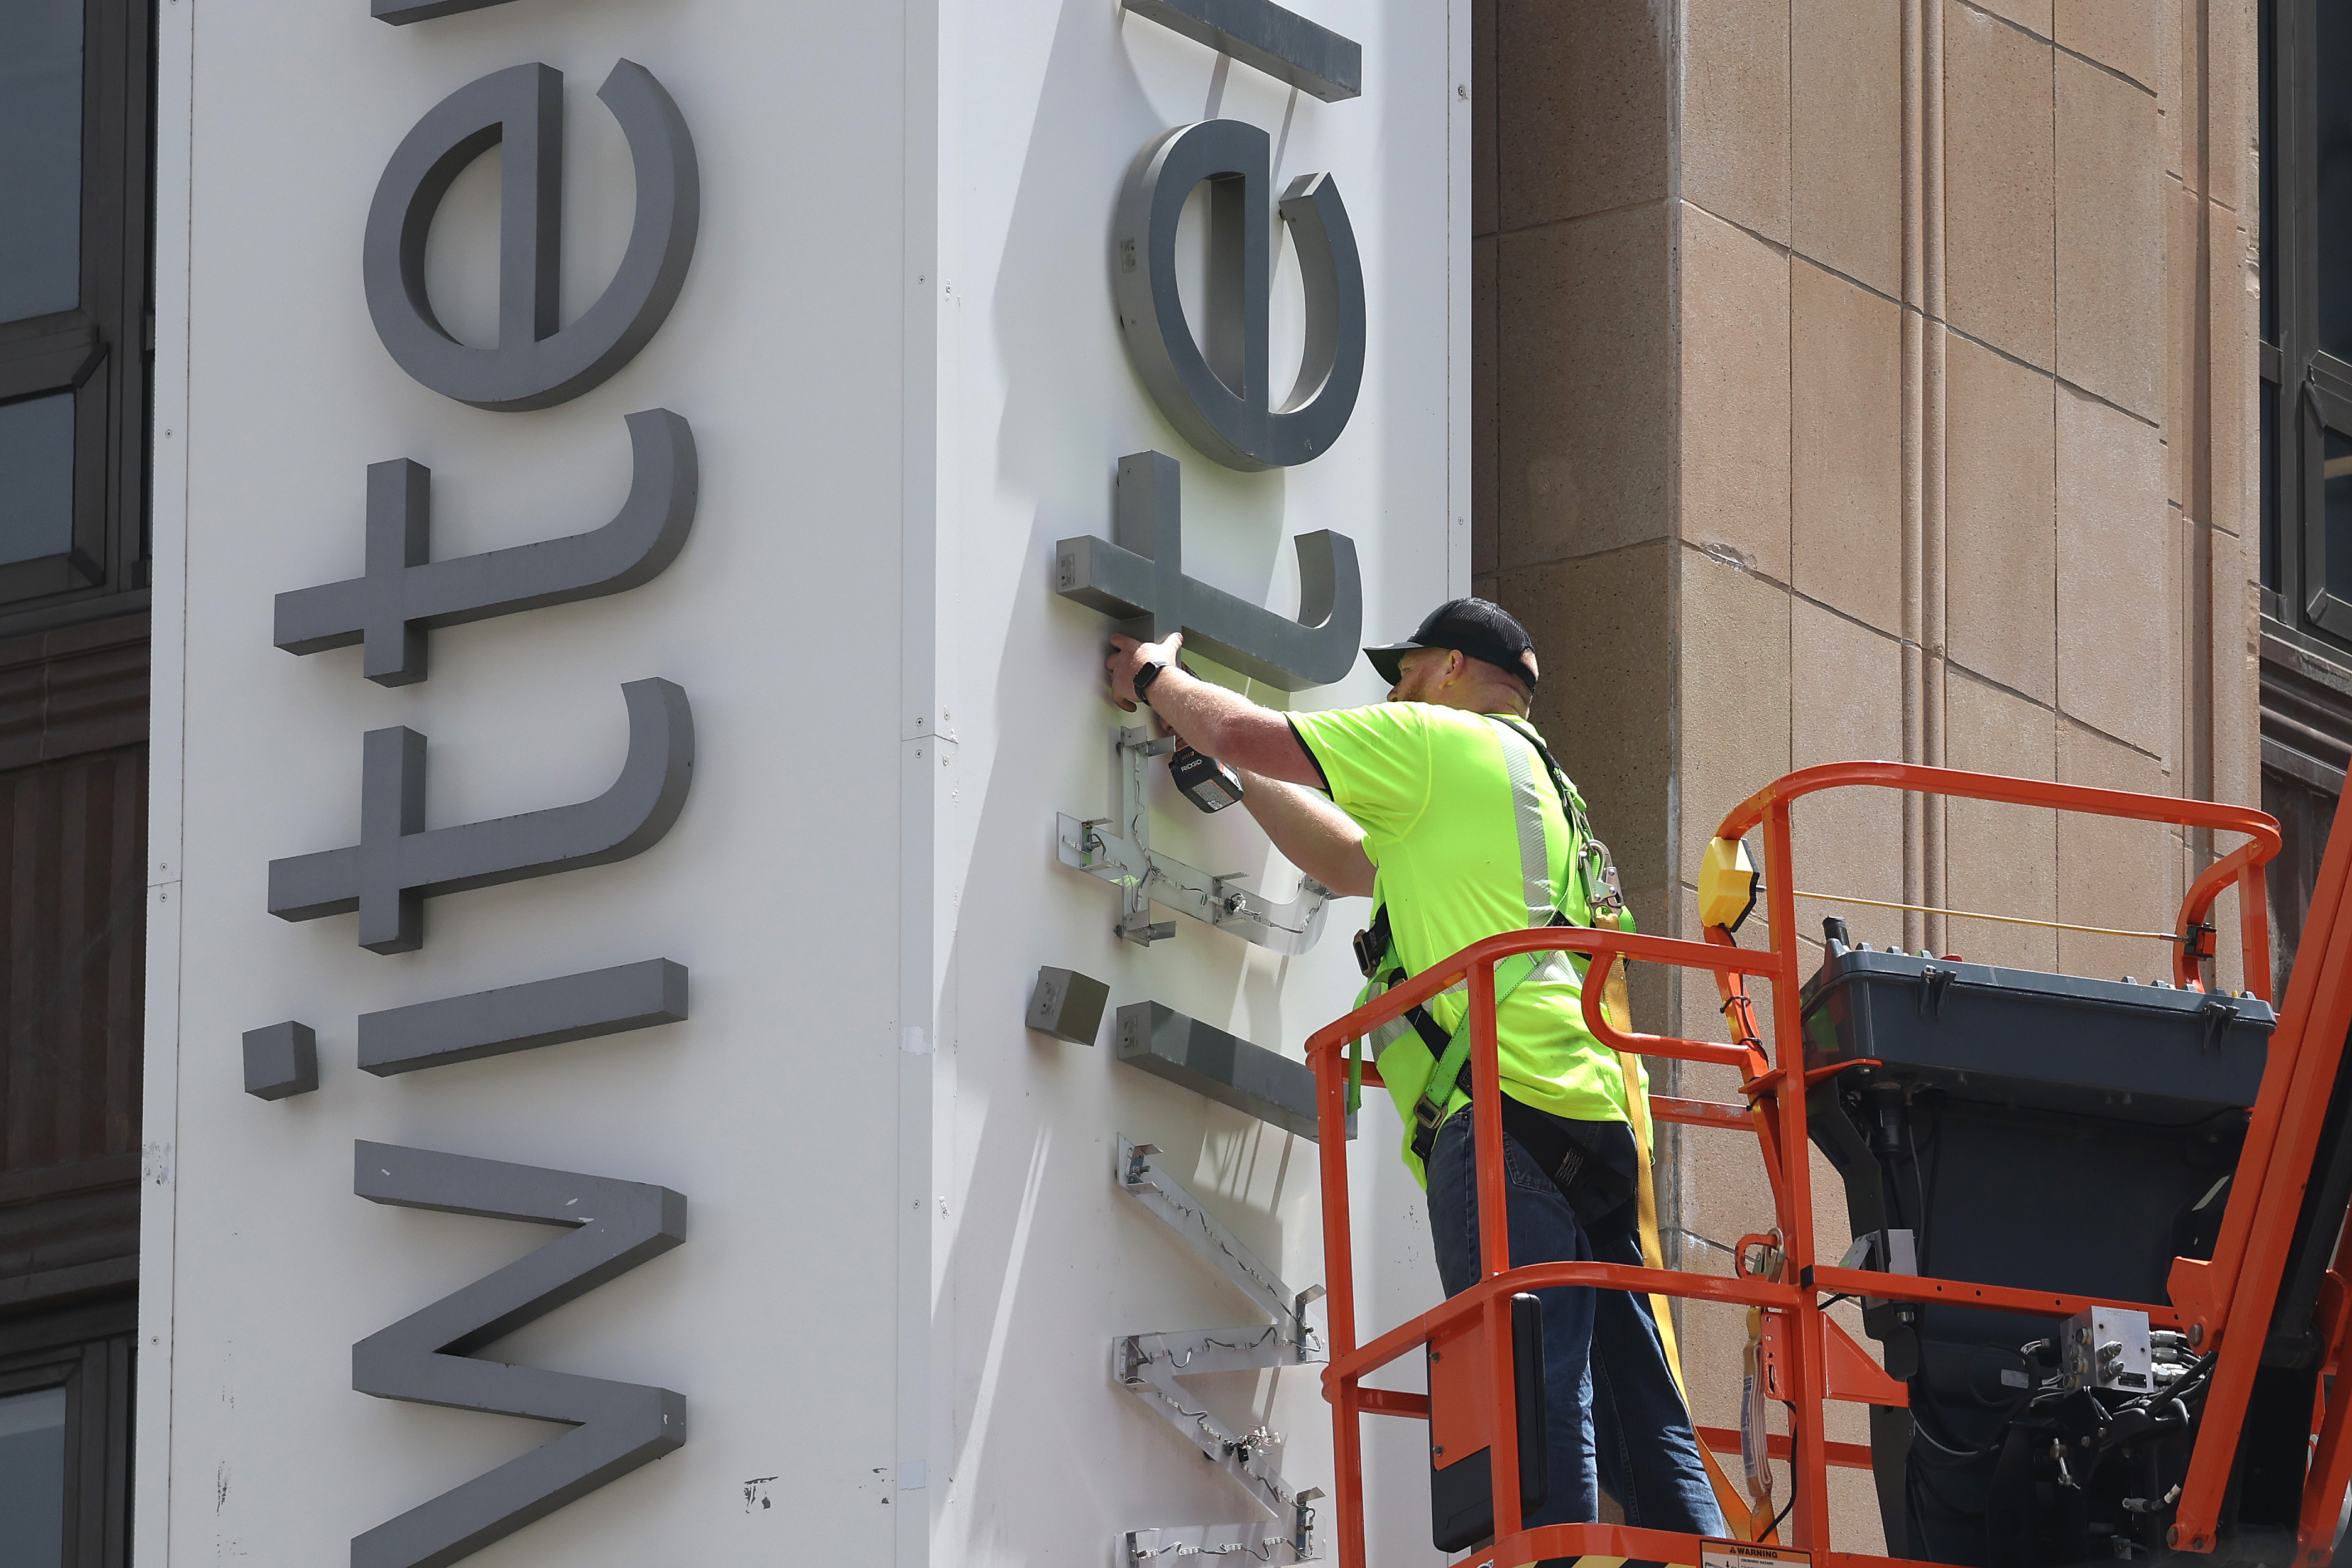 A worker removes letters from the Twitter sign that is posted on the exterior of Twitter headquarters on July 24, 2023 in San Francisco, California. Workers began removing the letters from the sign outside Twitter headquarters less than 24 hours after CEO Elon Musk officially rebranded Twitter as "X" and has changed its iconic bird logo, the biggest change he has made since taking over the social media platform. San Francisco police halted the sign removal shortly after it began. (Photo by Justin Sullivan/Getty Images)